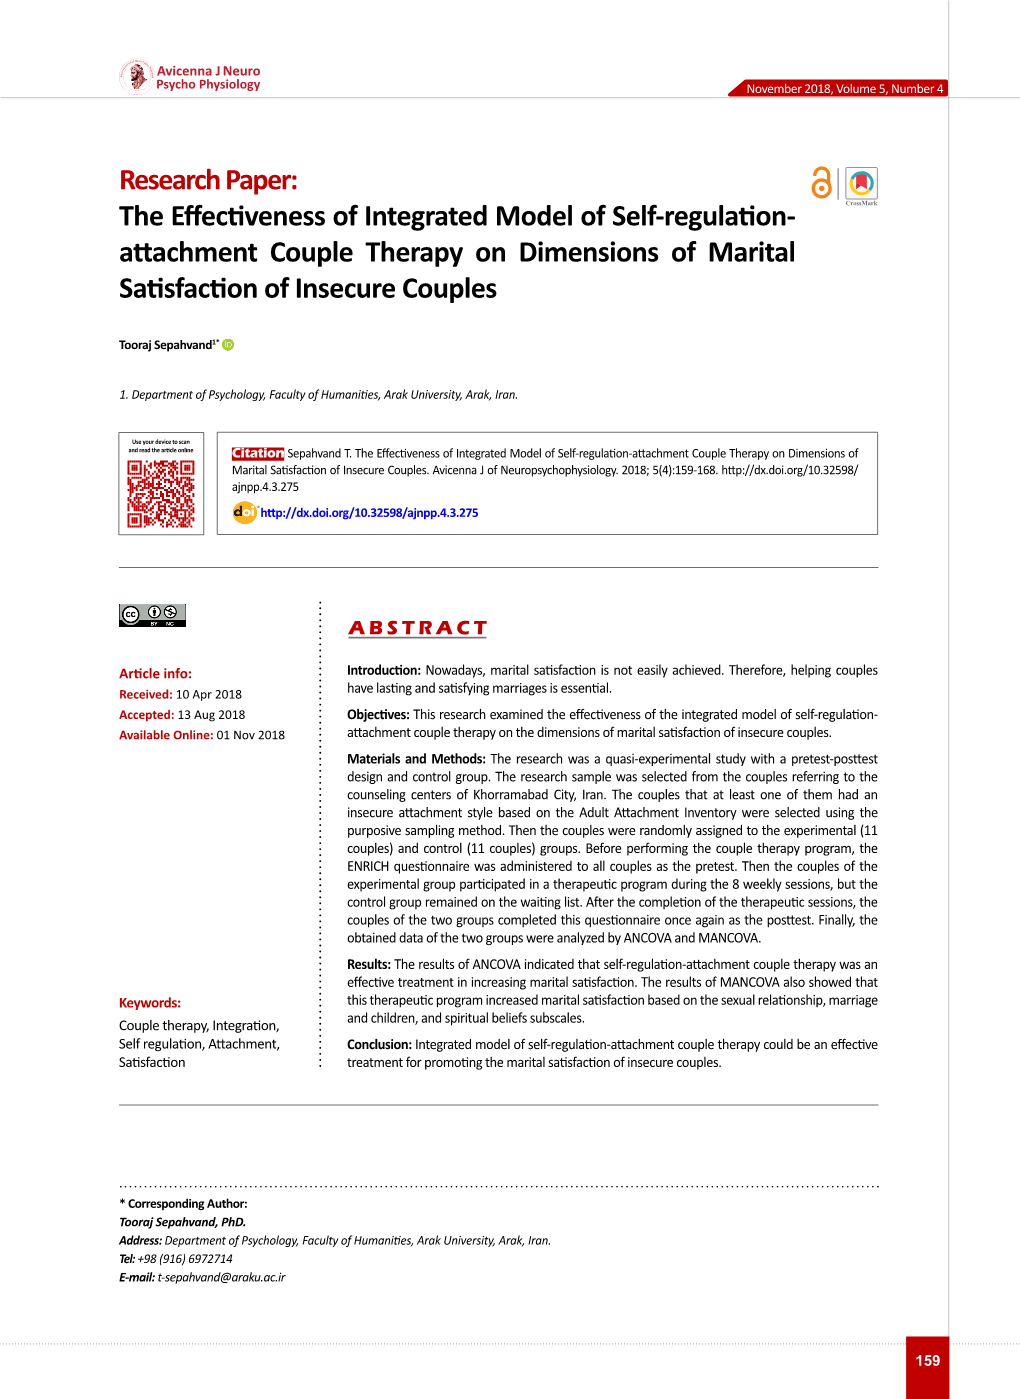 The Effectiveness of Integrated Model of Self-Regulation- Attachment Couple Therapy on Dimensions of Marital Satisfaction of Insecure Couples